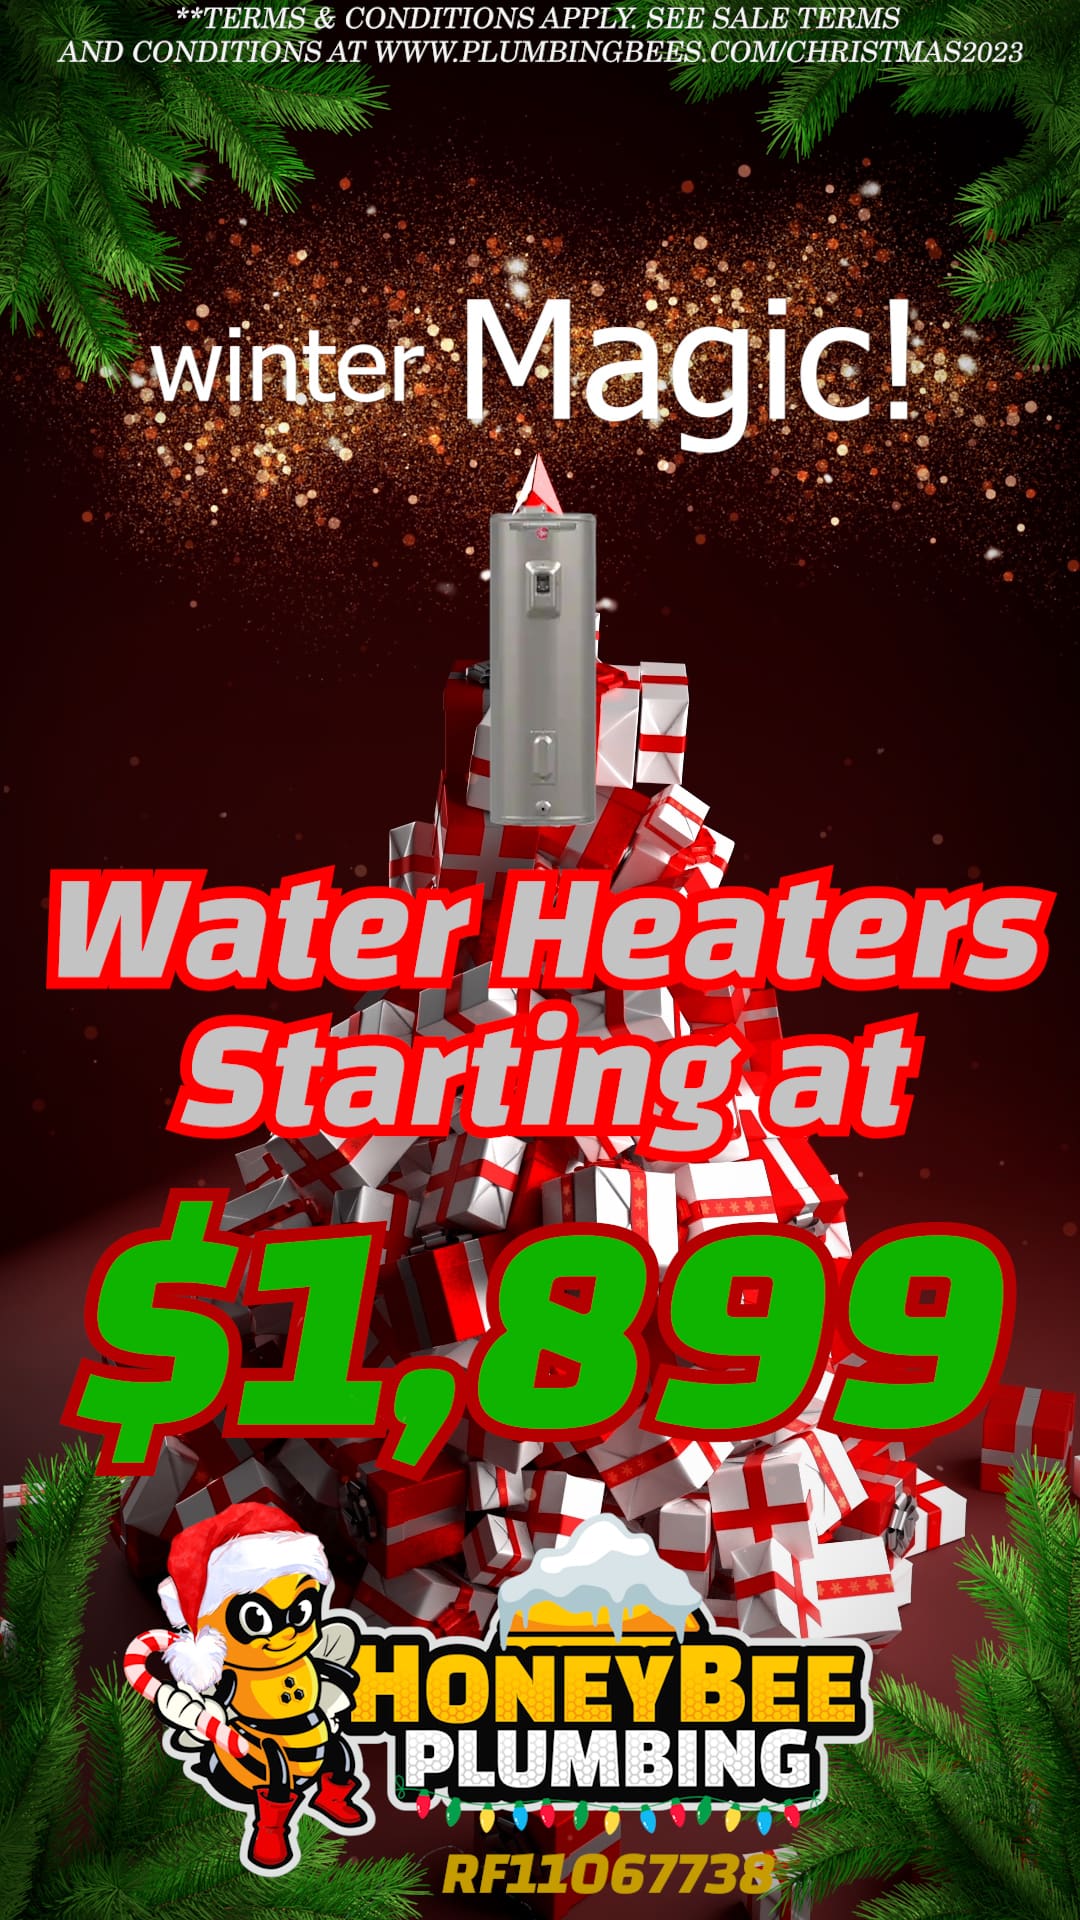 Advertisement for Honey Bee Plumbing's Christmas 2023 sale, featuring water heater replacements starting at 99. The image presents a modern water heater against a festive, holiday-inspired backdrop, adorned with seasonal elements like Christmas wreaths, sparkling lights, and a color scheme of red, green, and white. The Honey Bee Plumbing logo is prominently displayed, adding a touch of holiday cheer to the promotion.